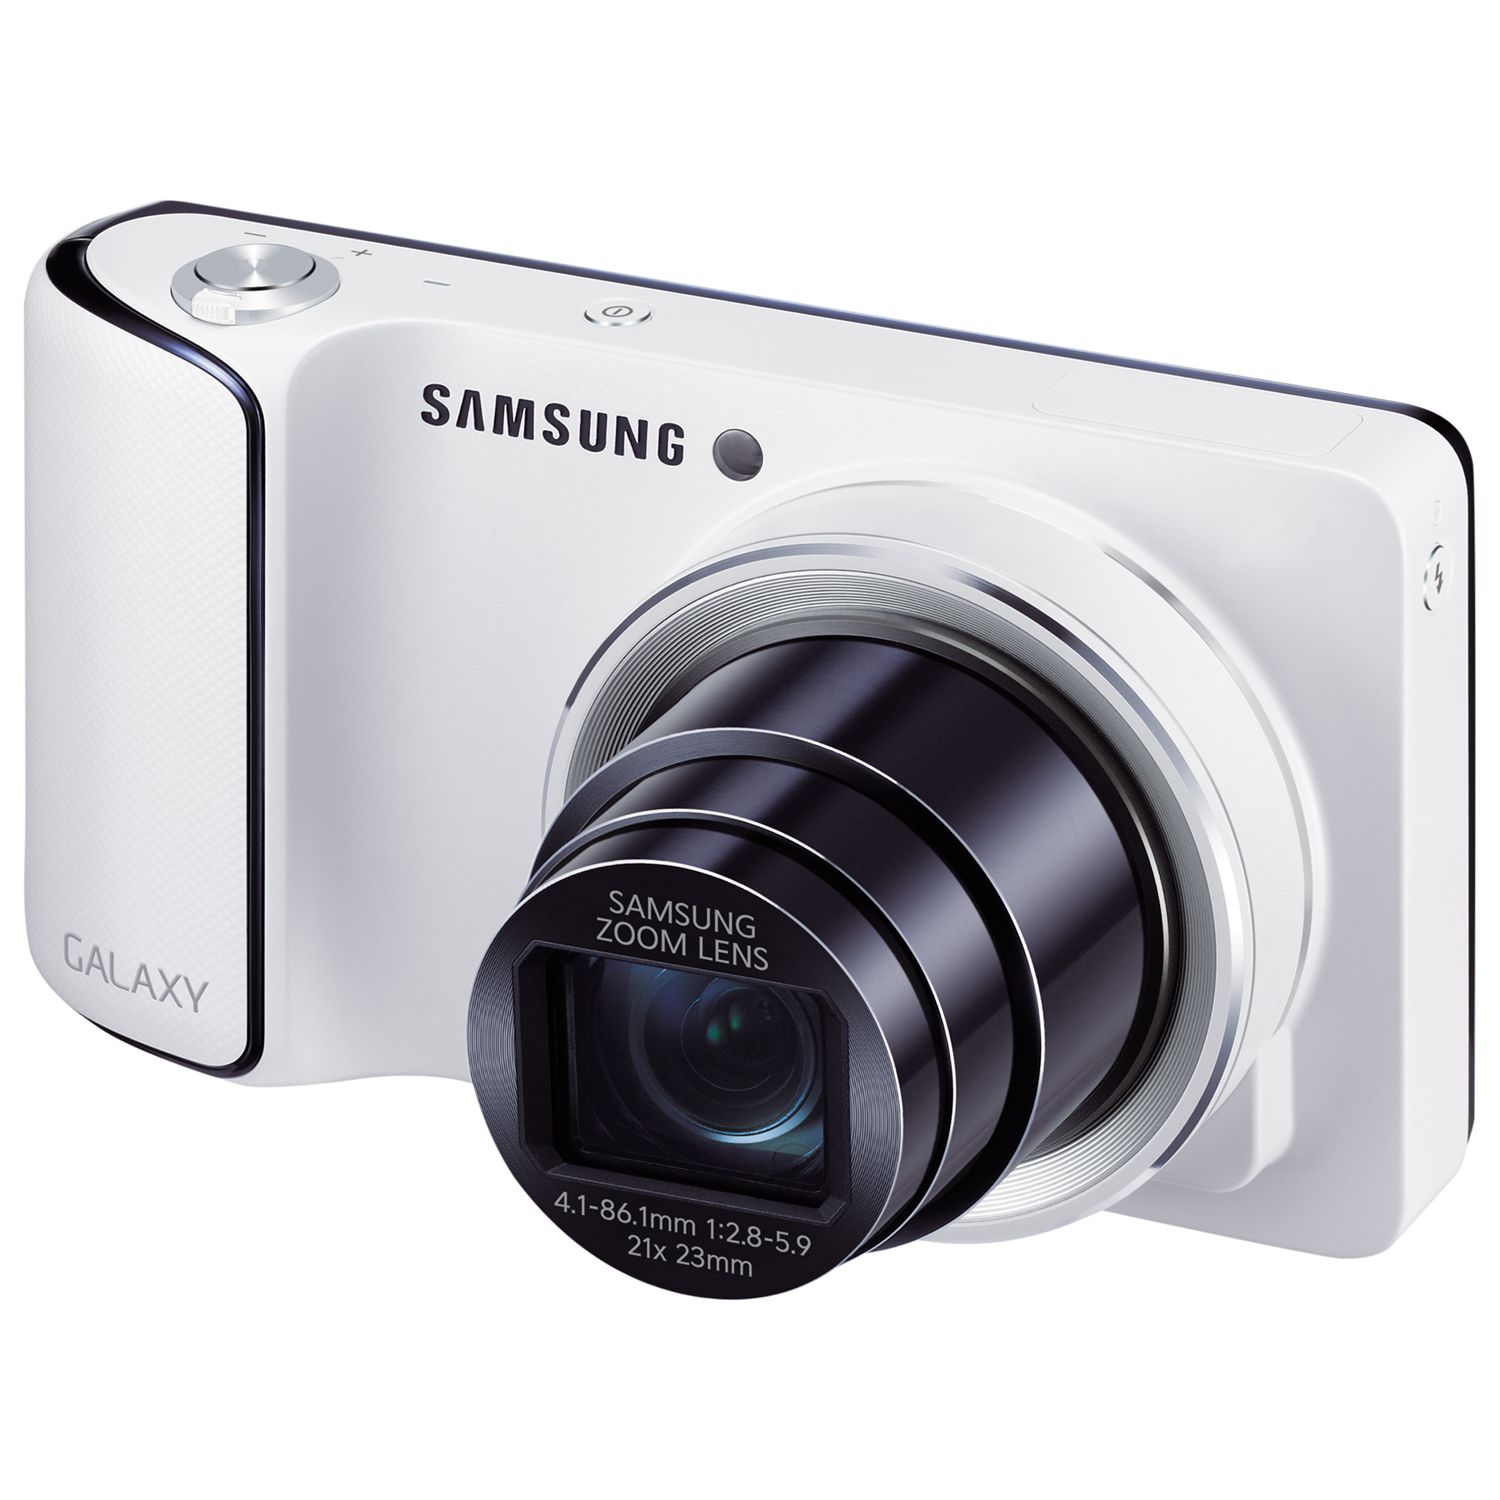 amsung Galaxy Camera, HD 1080p, 21x Zoom, 16.3MP, Wi-Fi/3G, GPS, 4.8" Touch Screen with FREE 3 SIM